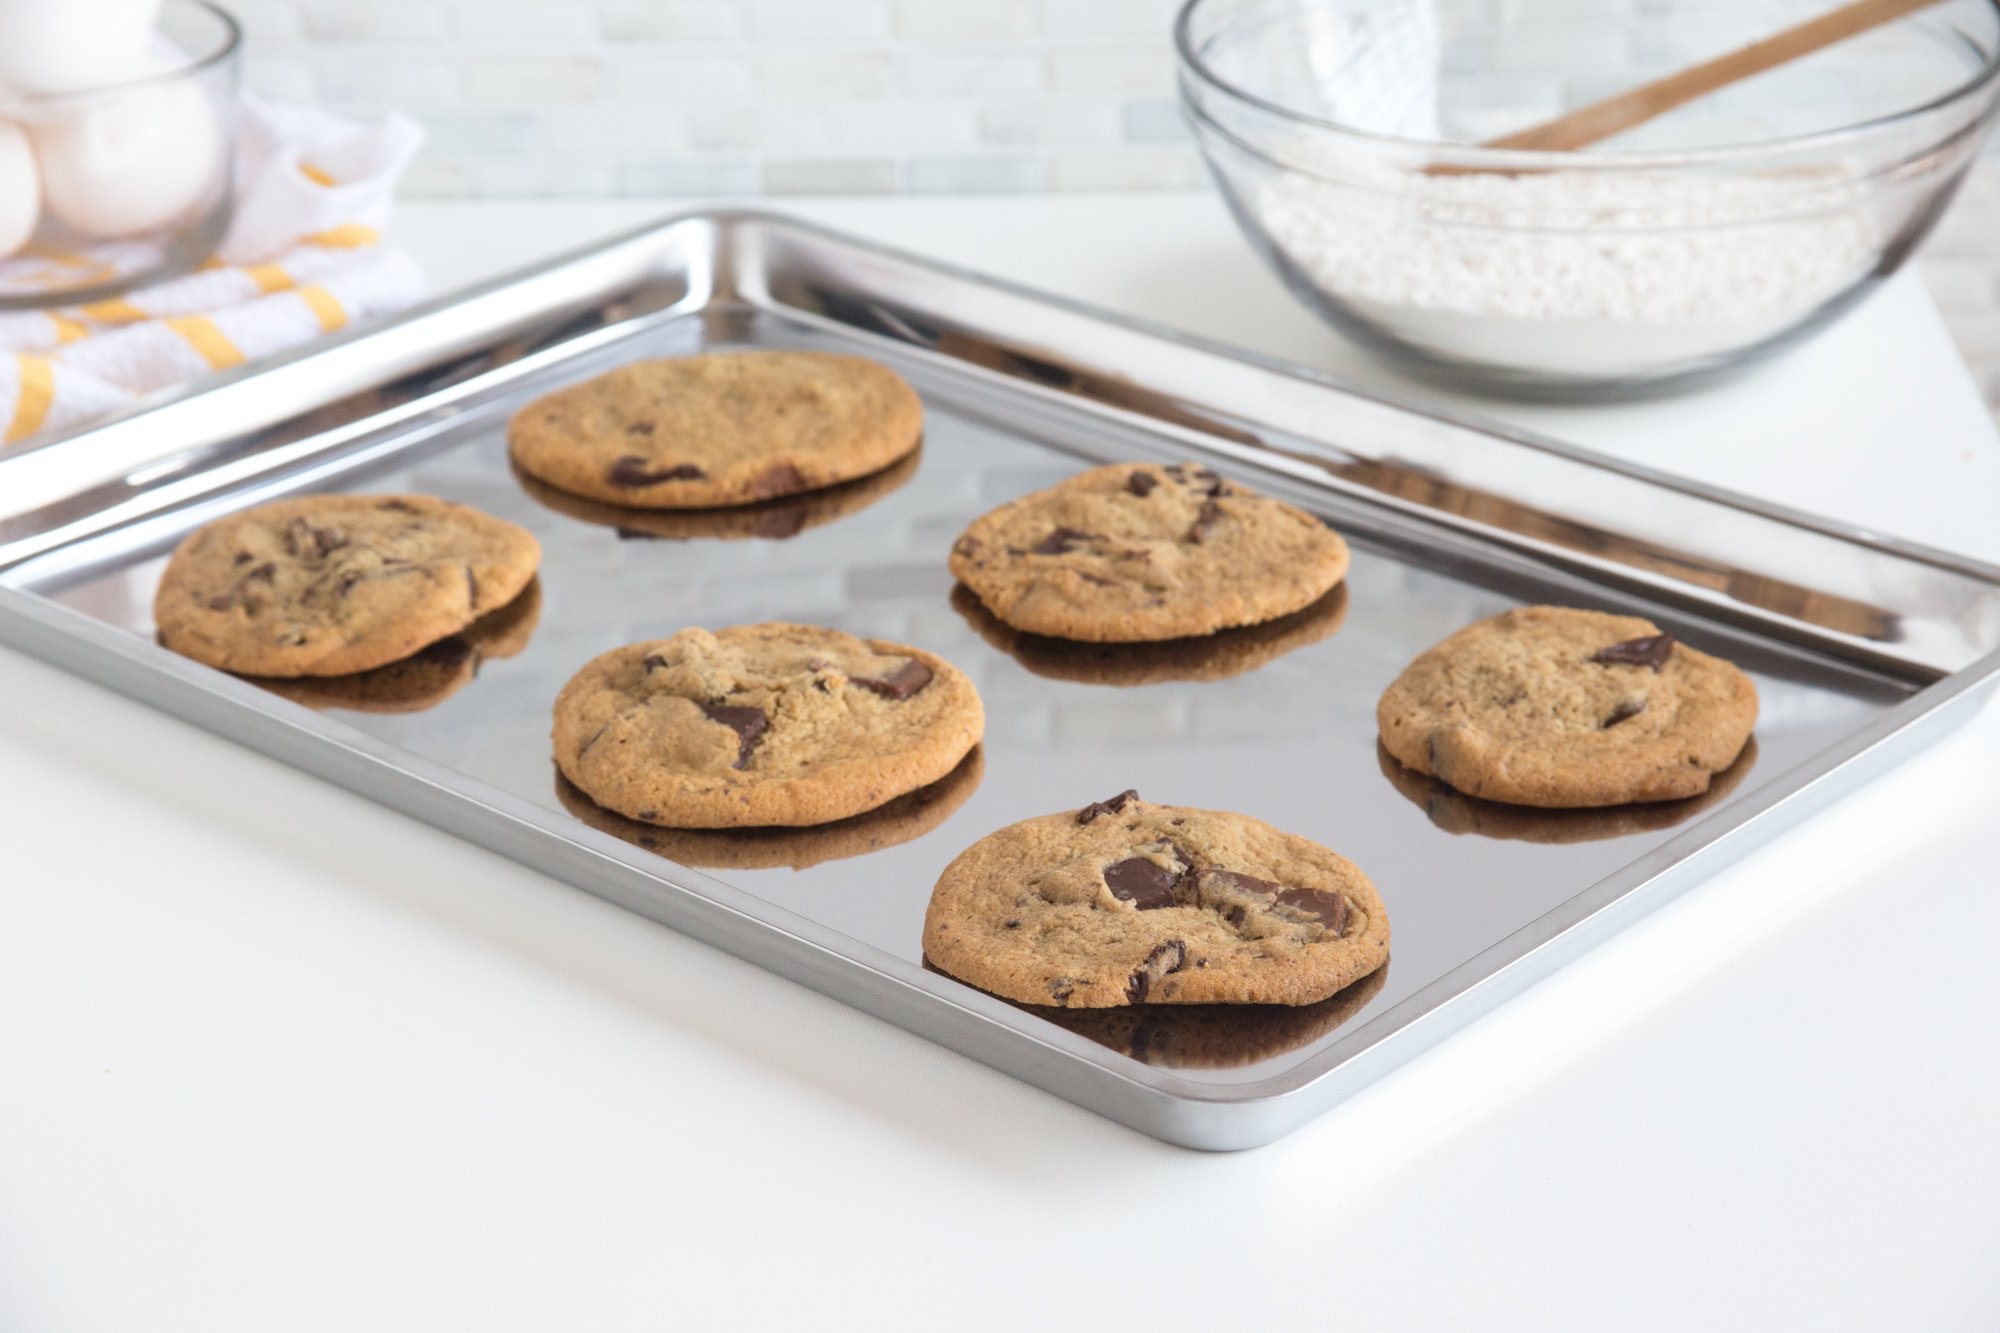 Fox Run Stainless Steel Jelly Roll Pan & Cookie Baking Sheet, 16.25 x 11.25 x 0.75 inches